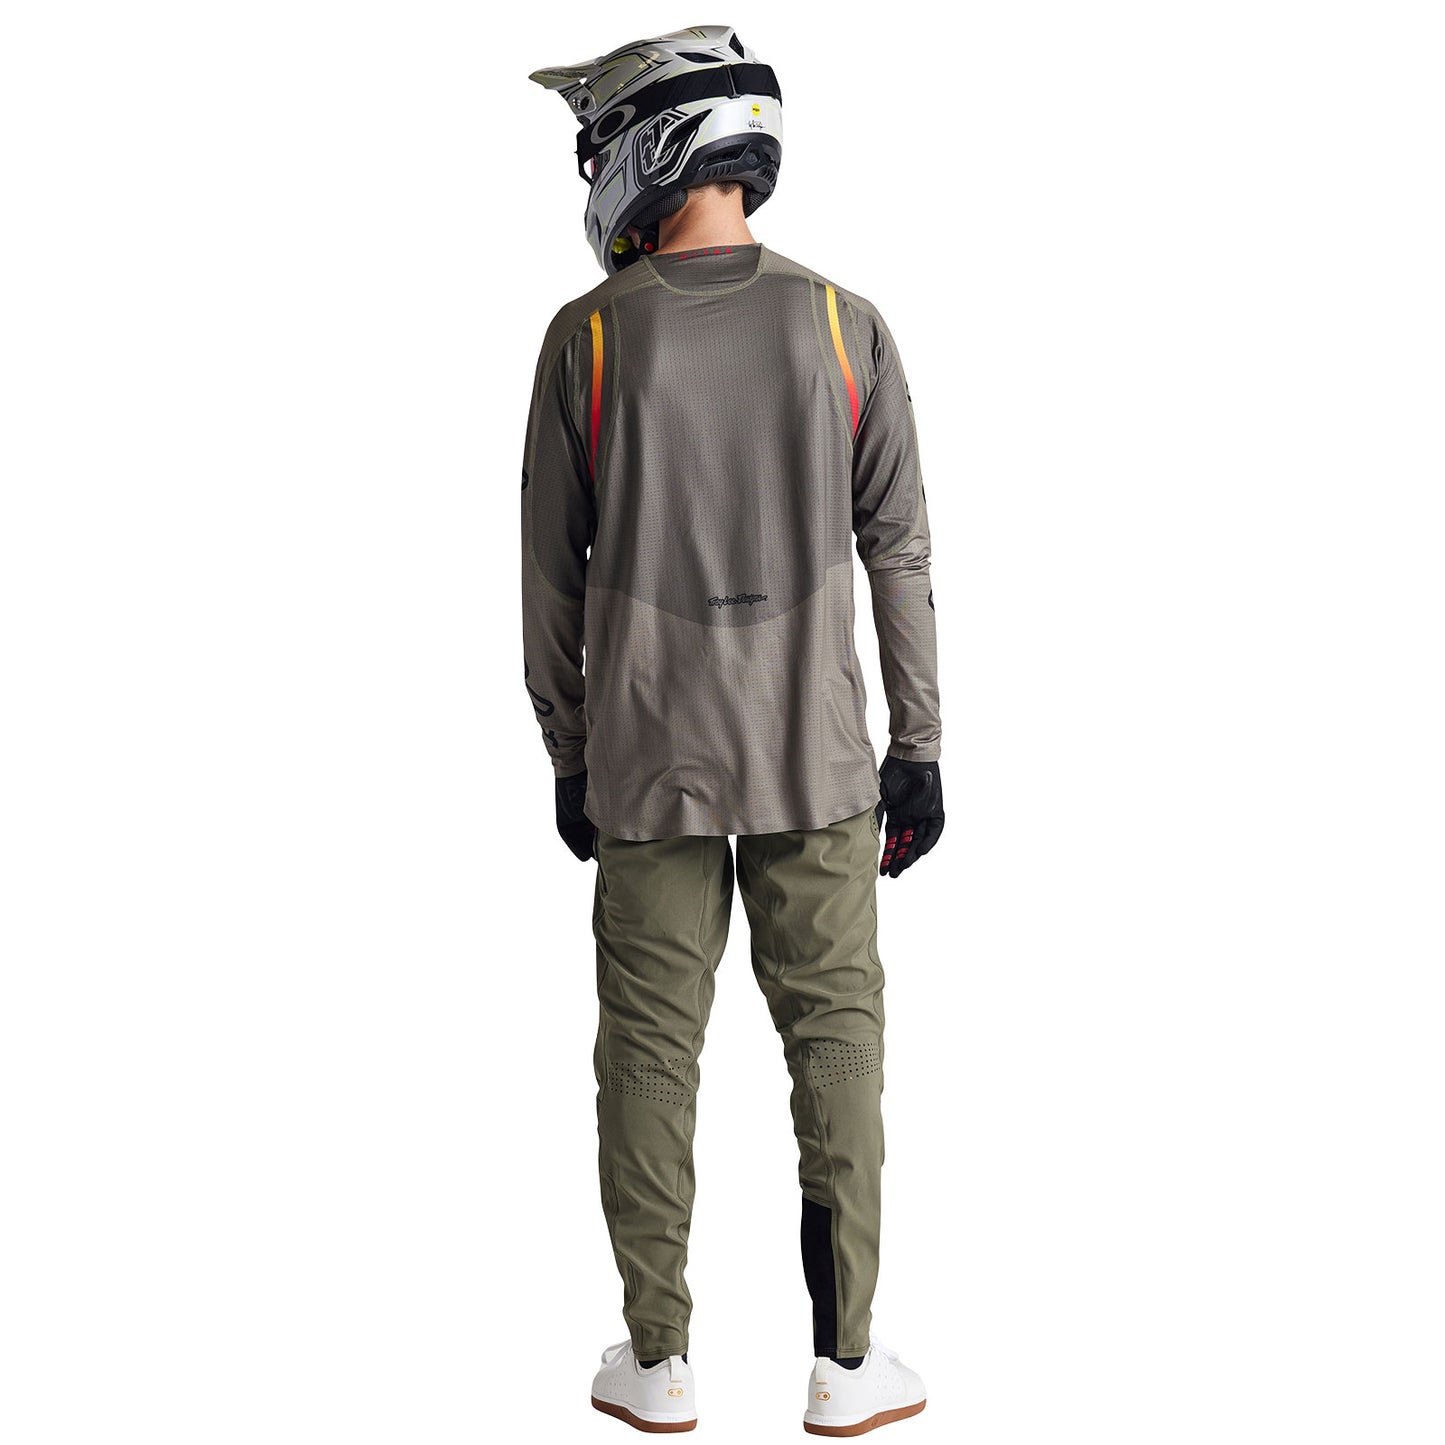 Sprint Ultra Jersey Pinned Olive